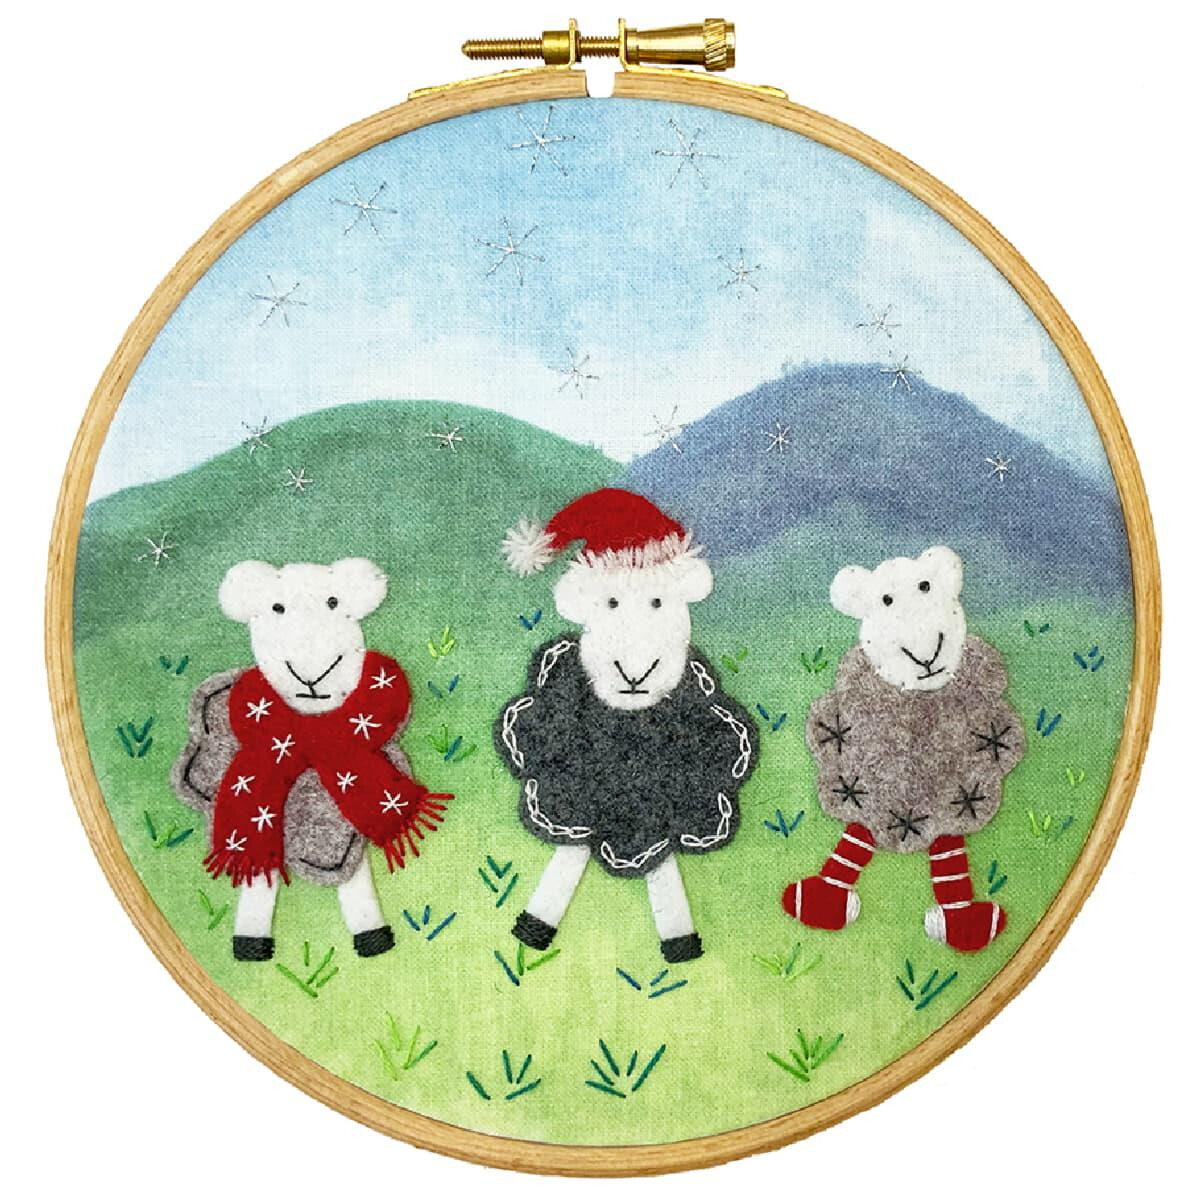 An embroidery frame shows three sheep in a grassy...